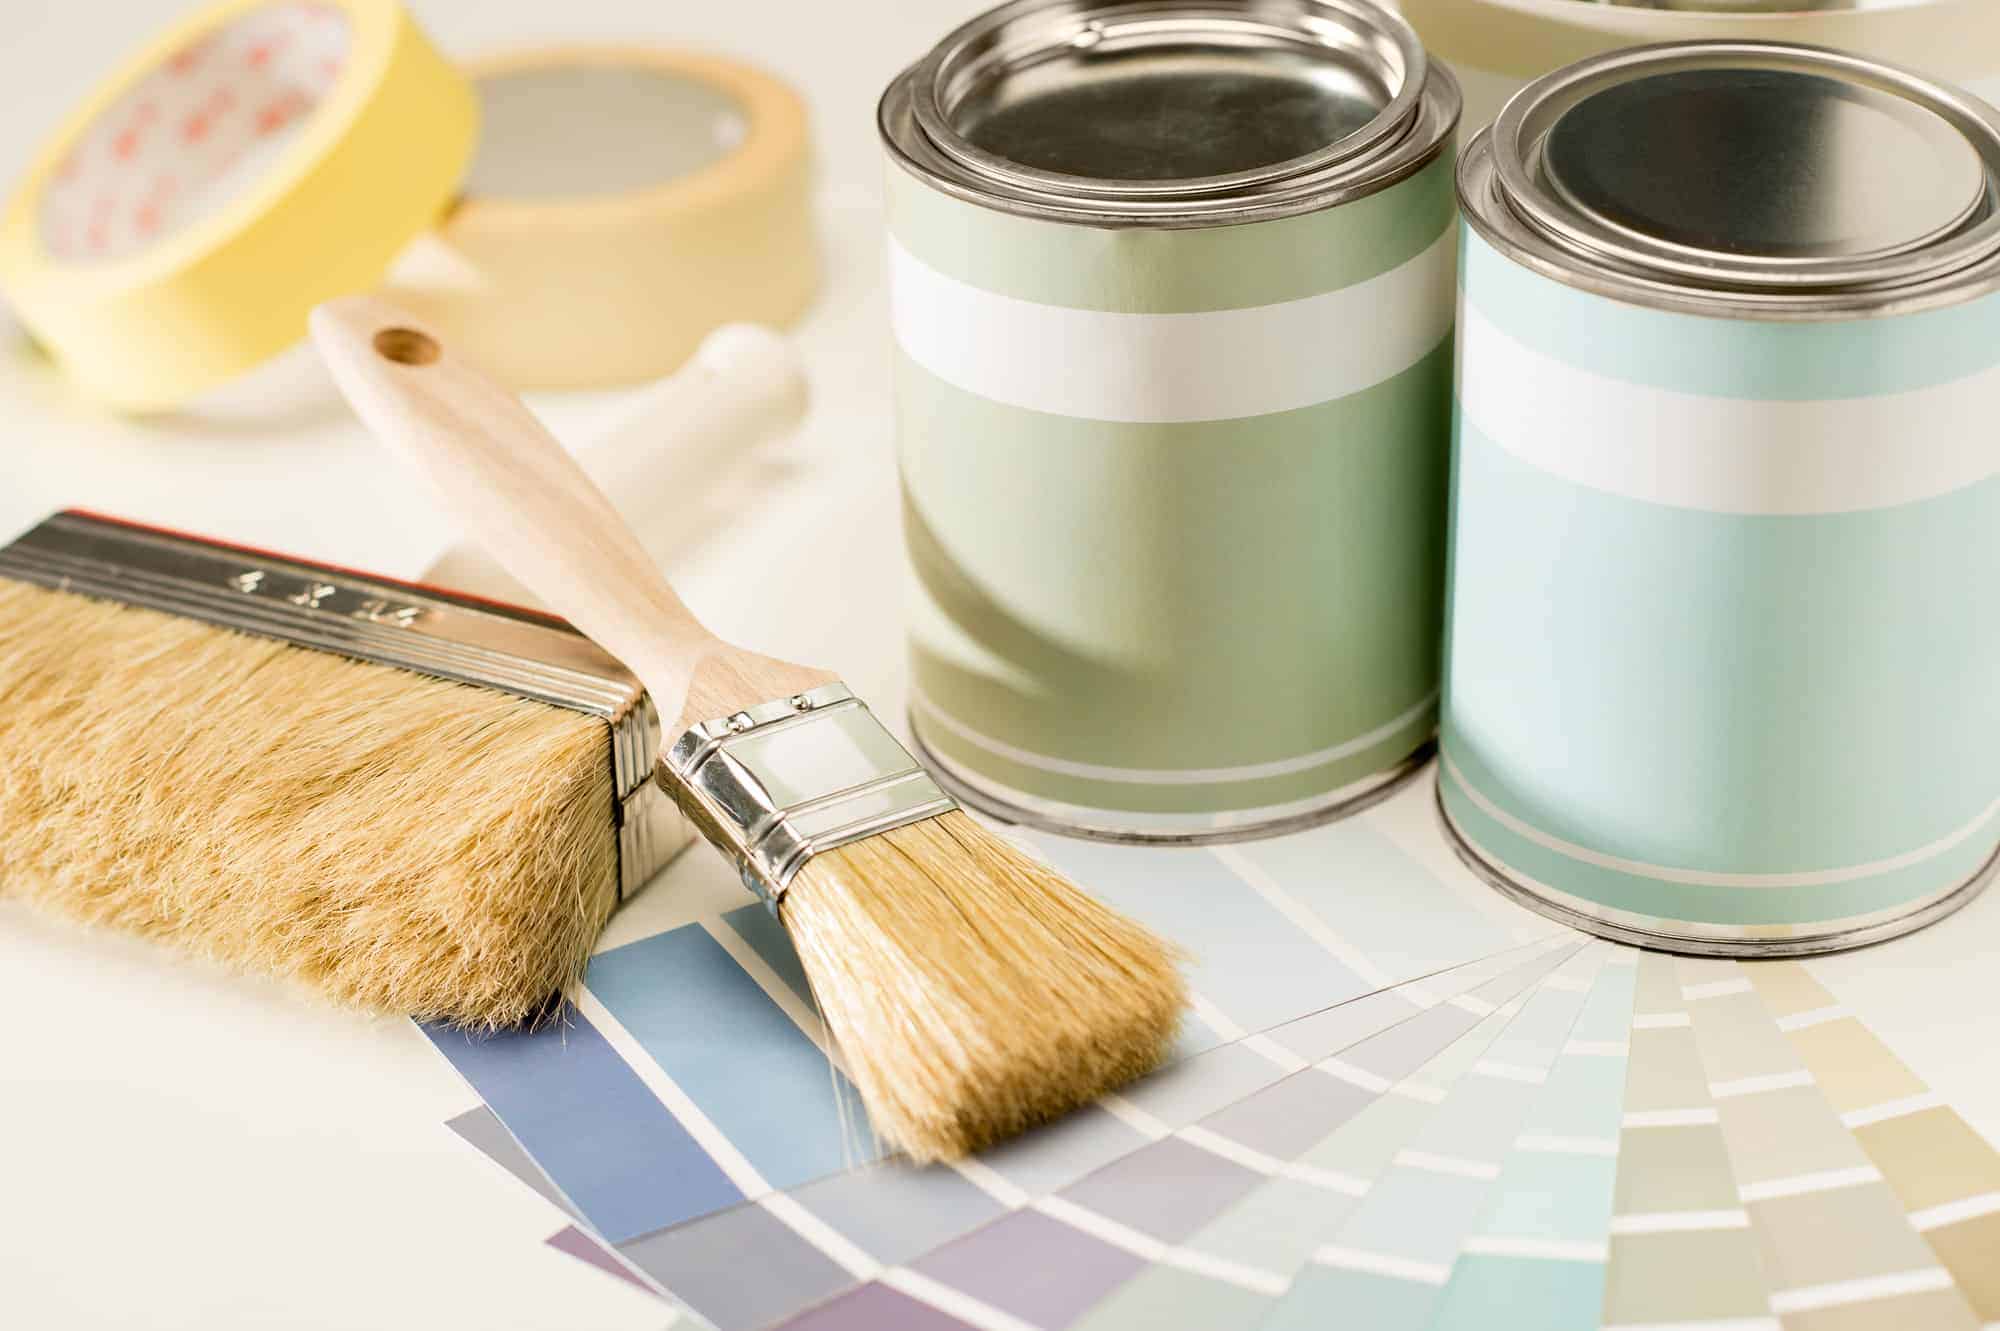 Two small cans of paint on the right; two paint brushes, some painter\'s tape and paint swatches on the left